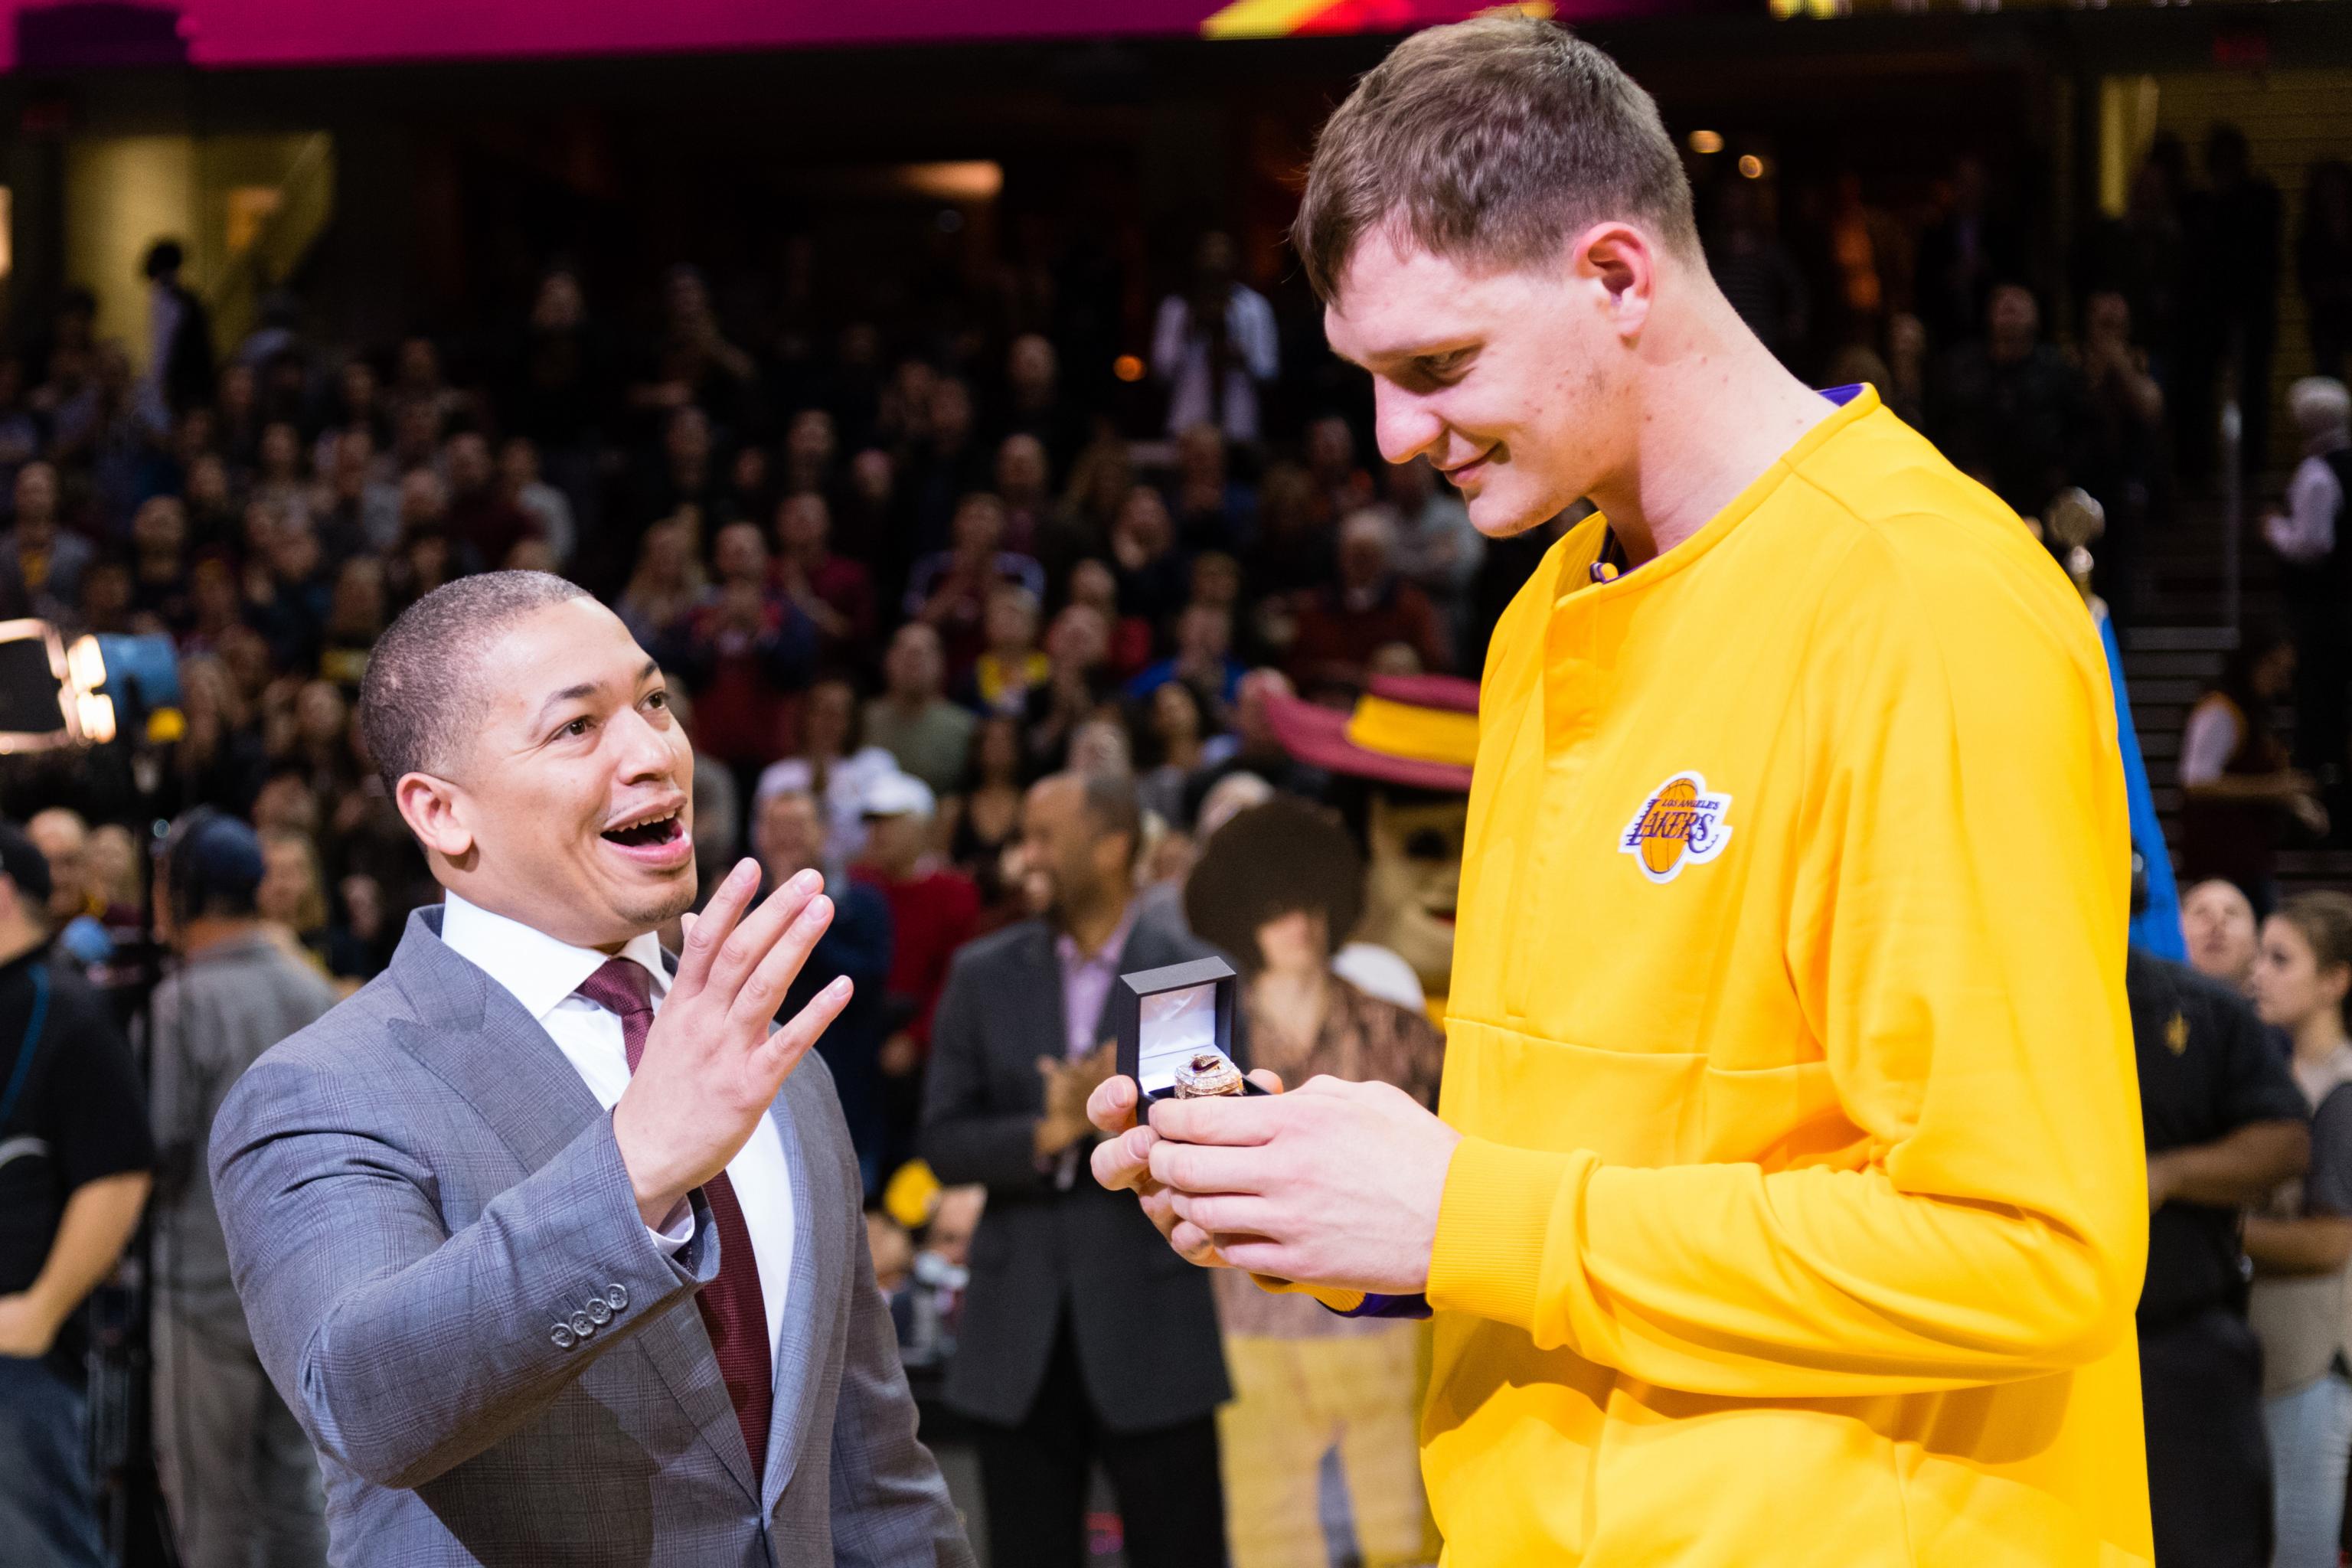 Cleveland Cavaliers present Timofey Mozgov his ring 